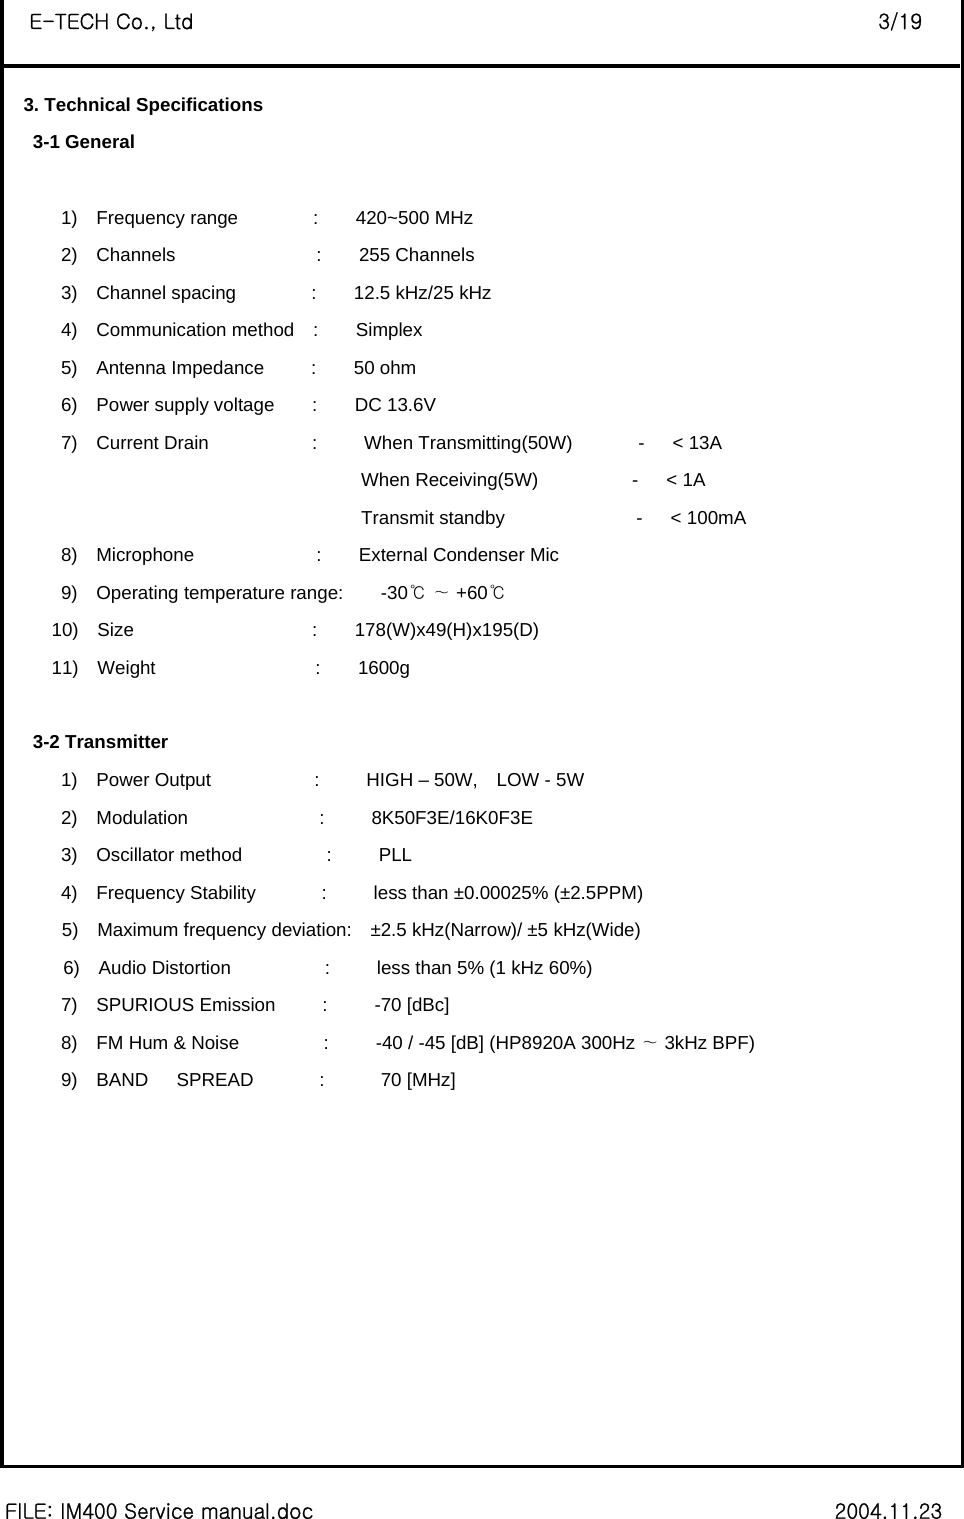  FILE: IM400 Service manual.doc                                                        2004.11.23 E-TECH Co., Ltd                                                                   3/19 3. Technical Specifications    3-1 General         1)  Frequency range        :    420~500 MHz 2)  Channels               :    255 Channels 3)  Channel spacing        :    12.5 kHz/25 kHz 4)  Communication method  :    Simplex 5)  Antenna Impedance     :    50 ohm  6)  Power supply voltage    :    DC 13.6V 7)  Current Drain           :     When Transmitting(50W)       -   &lt; 13A                                       When Receiving(5W)          -   &lt; 1A                                       Transmit standby              -   &lt; 100mA 8)  Microphone             :    External Condenser Mic 9)  Operating temperature range:    -30    +℃∼ 60℃      10)  Size                   :    178(W)x49(H)x195(D)  11)  Weight                 :    1600g     3-2 Transmitter       1)  Power Output           :     HIGH – 50W,  LOW - 5W       2)  Modulation              :     8K50F3E/16K0F3E       3)  Oscillator method         :     PLL       4)  Frequency Stability       :     less than ±0.00025% (±2.5PPM) 5)  Maximum frequency deviation:  ±2.5 kHz(Narrow)/ ±5 kHz(Wide) 6)  Audio Distortion          :     less than 5% (1 kHz 60%)       7)  SPURIOUS Emission     :     -70 [dBc]       8)  FM Hum &amp; Noise         :     -40 / -45 [dB] (HP8920A 300Hz   3kHz BP∼F)        9)  BAND   SPREAD       :      70 [MHz]              